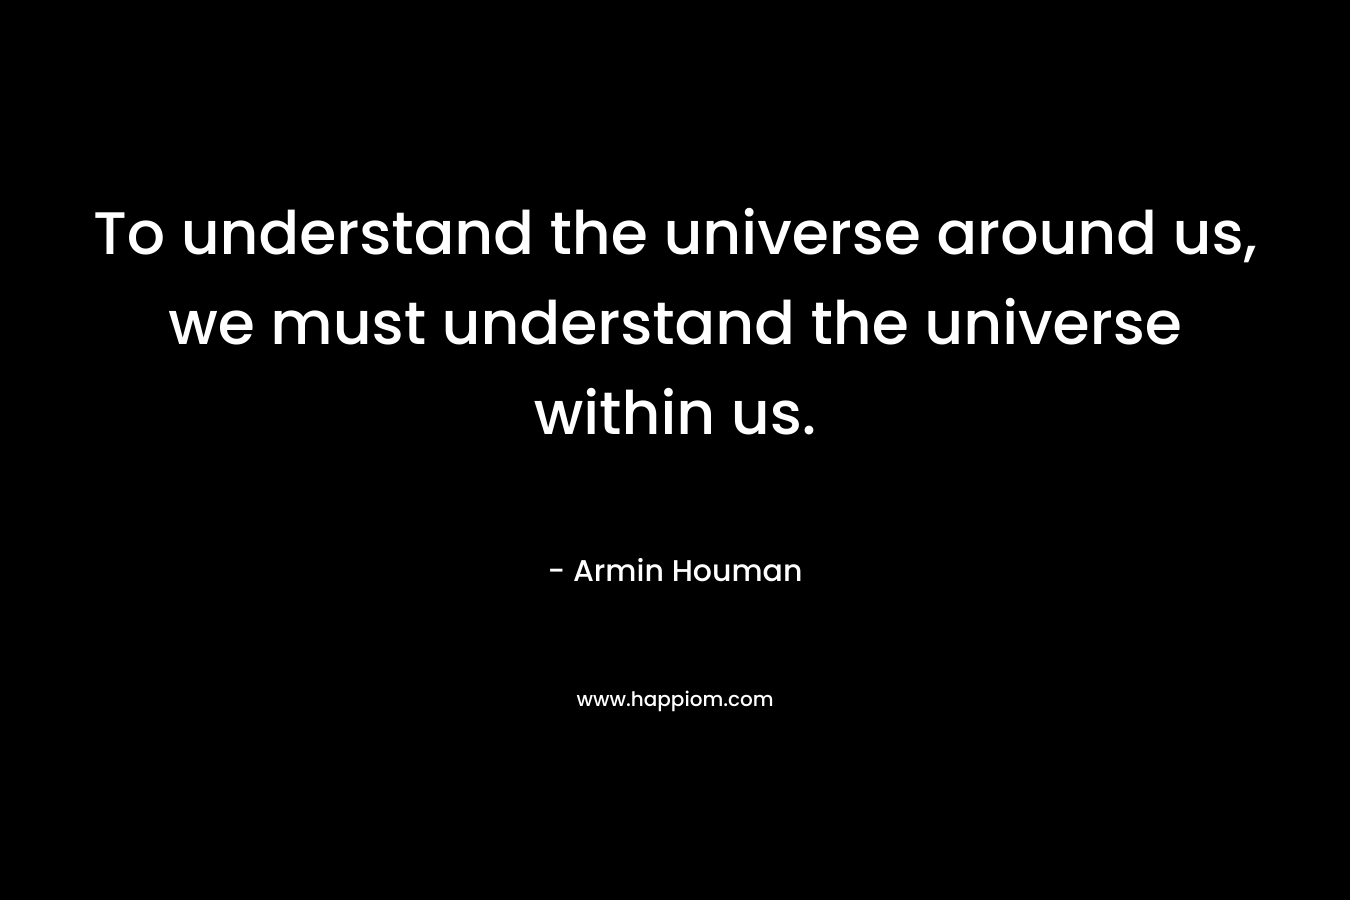 To understand the universe around us, we must understand the universe within us.